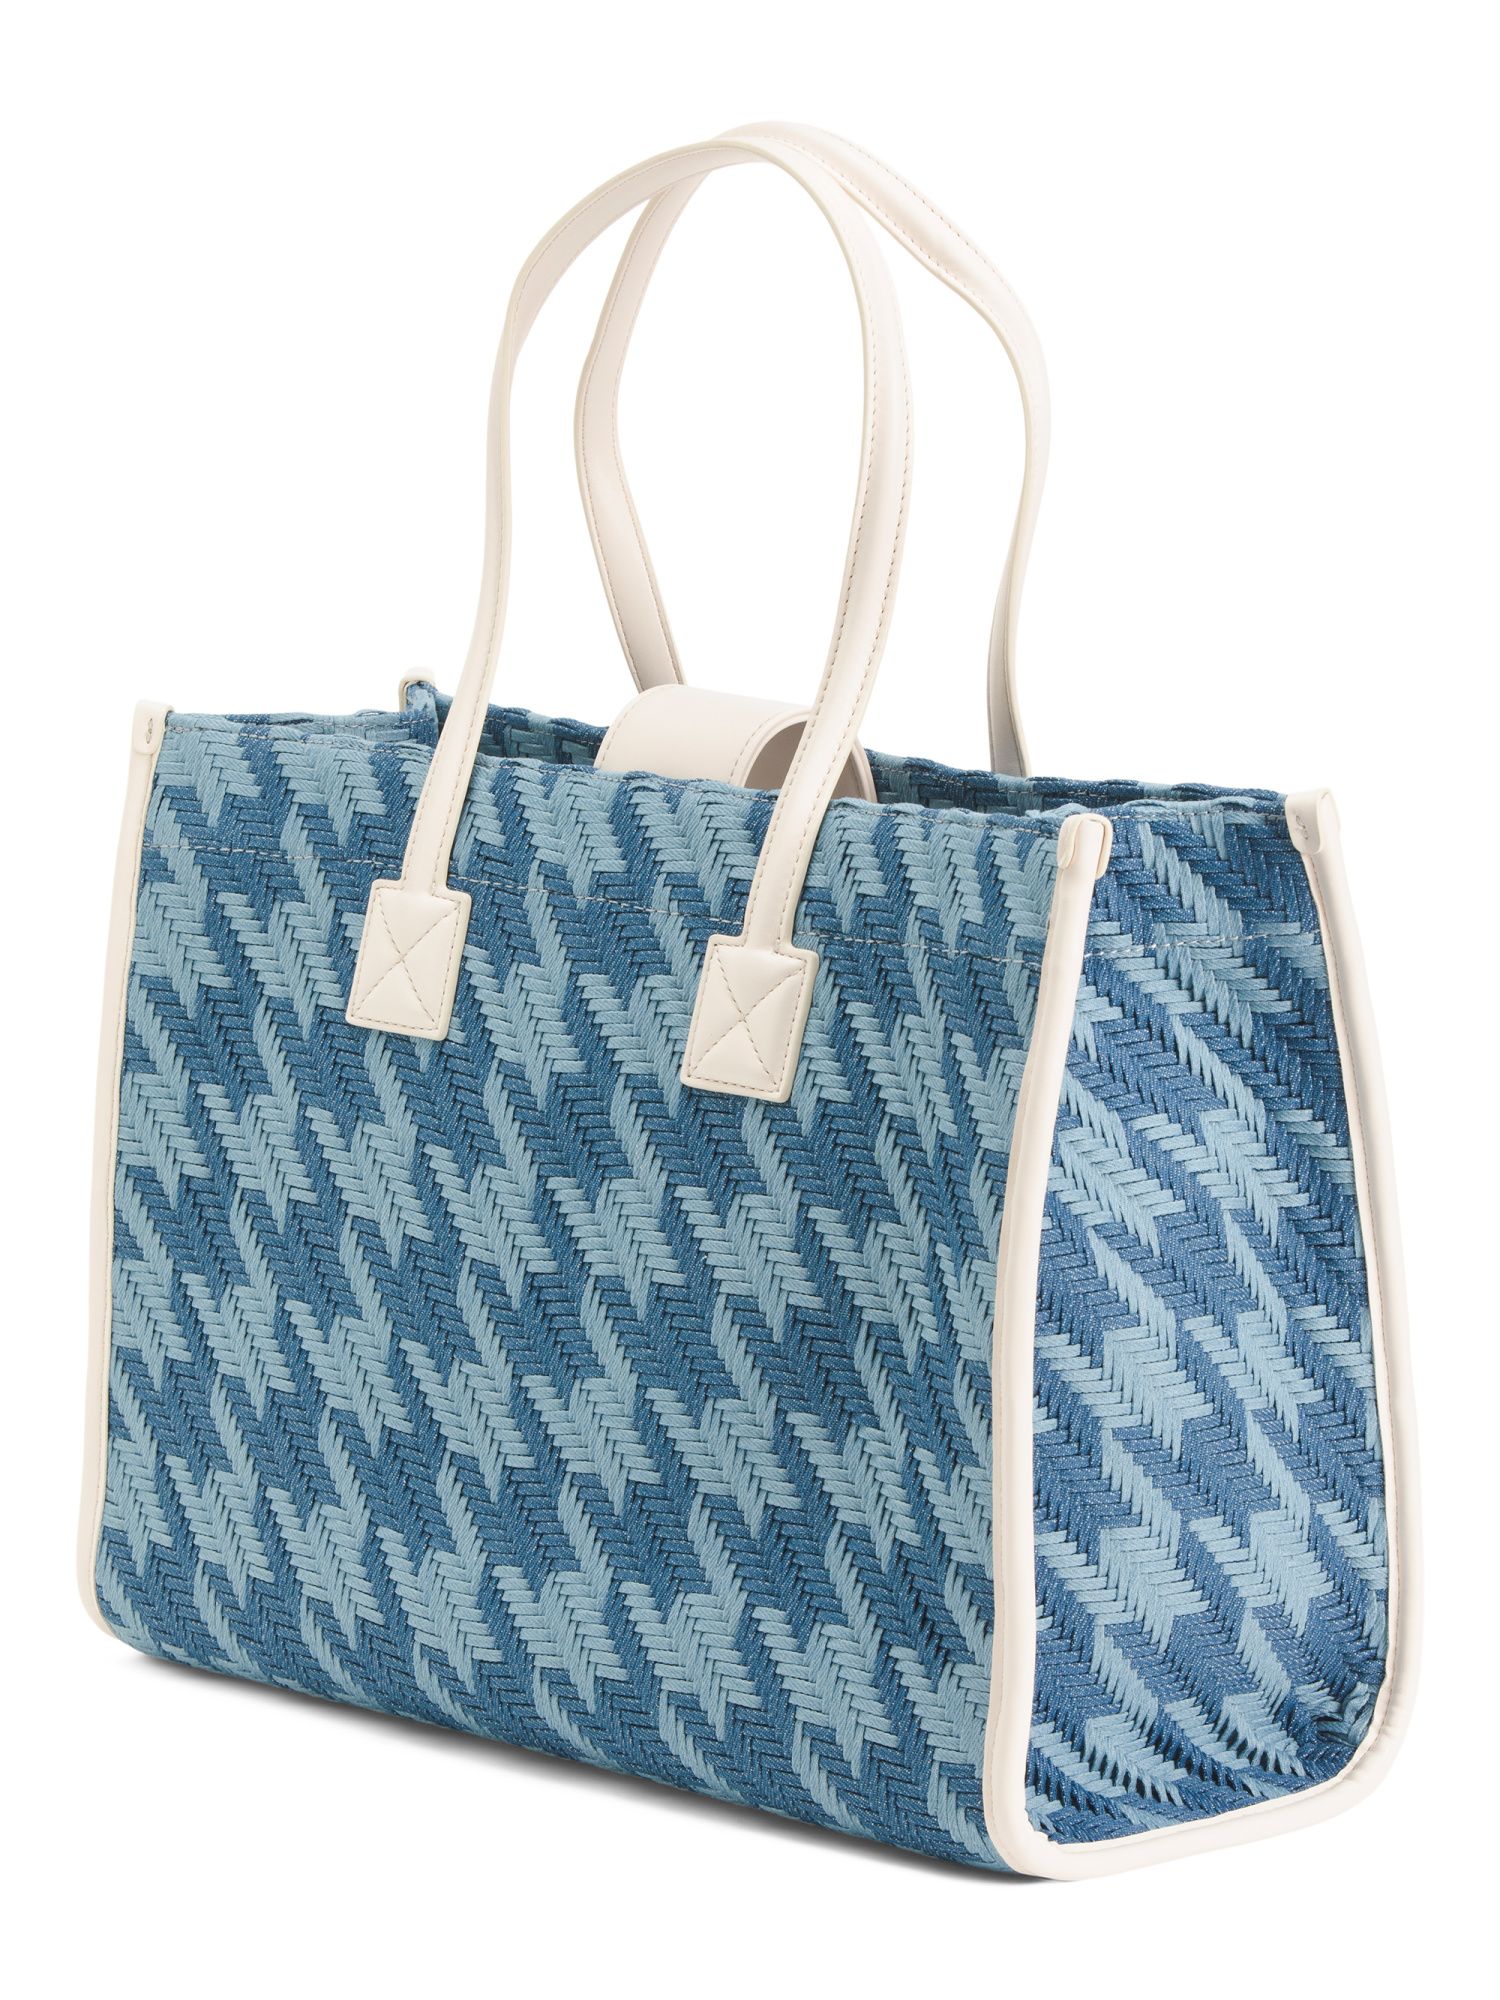 Saly Houndstooth Weave Large Tote With Contrast Trim | Handbags | Marshalls | Marshalls